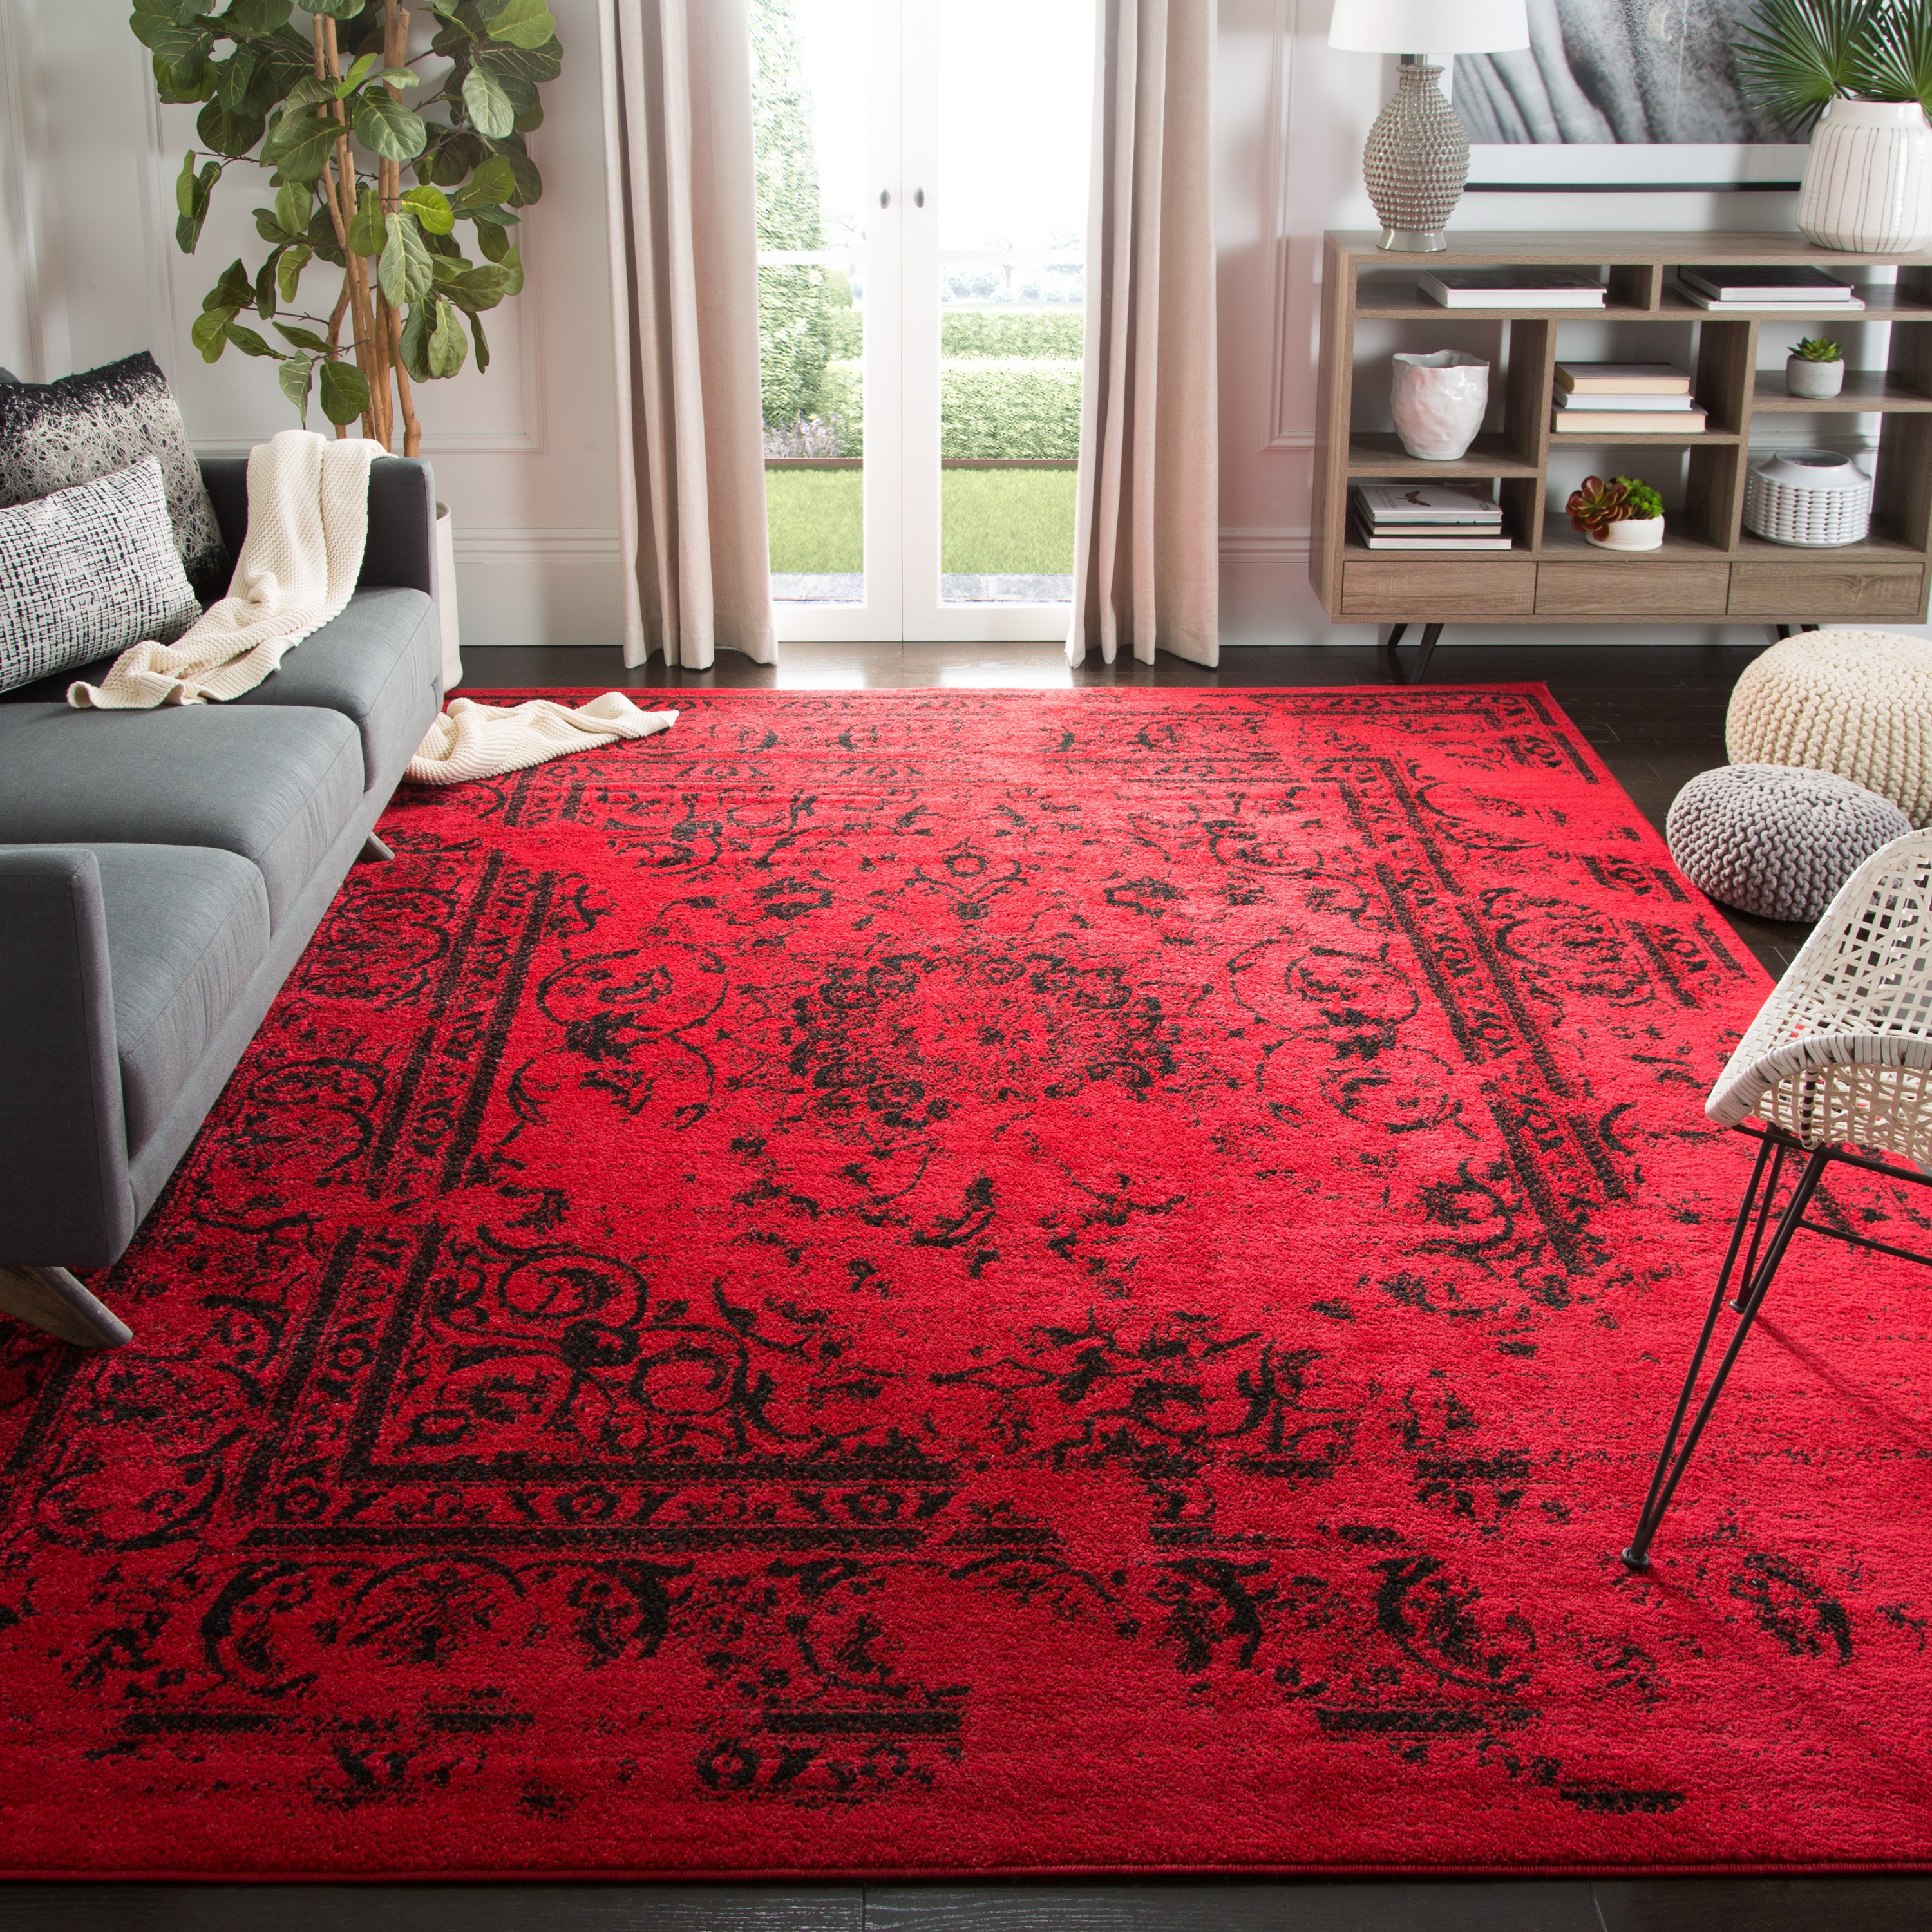 MSRUGS Frize 4 x 5 Black/Red Indoor Abstract Area Rug in the Rugs